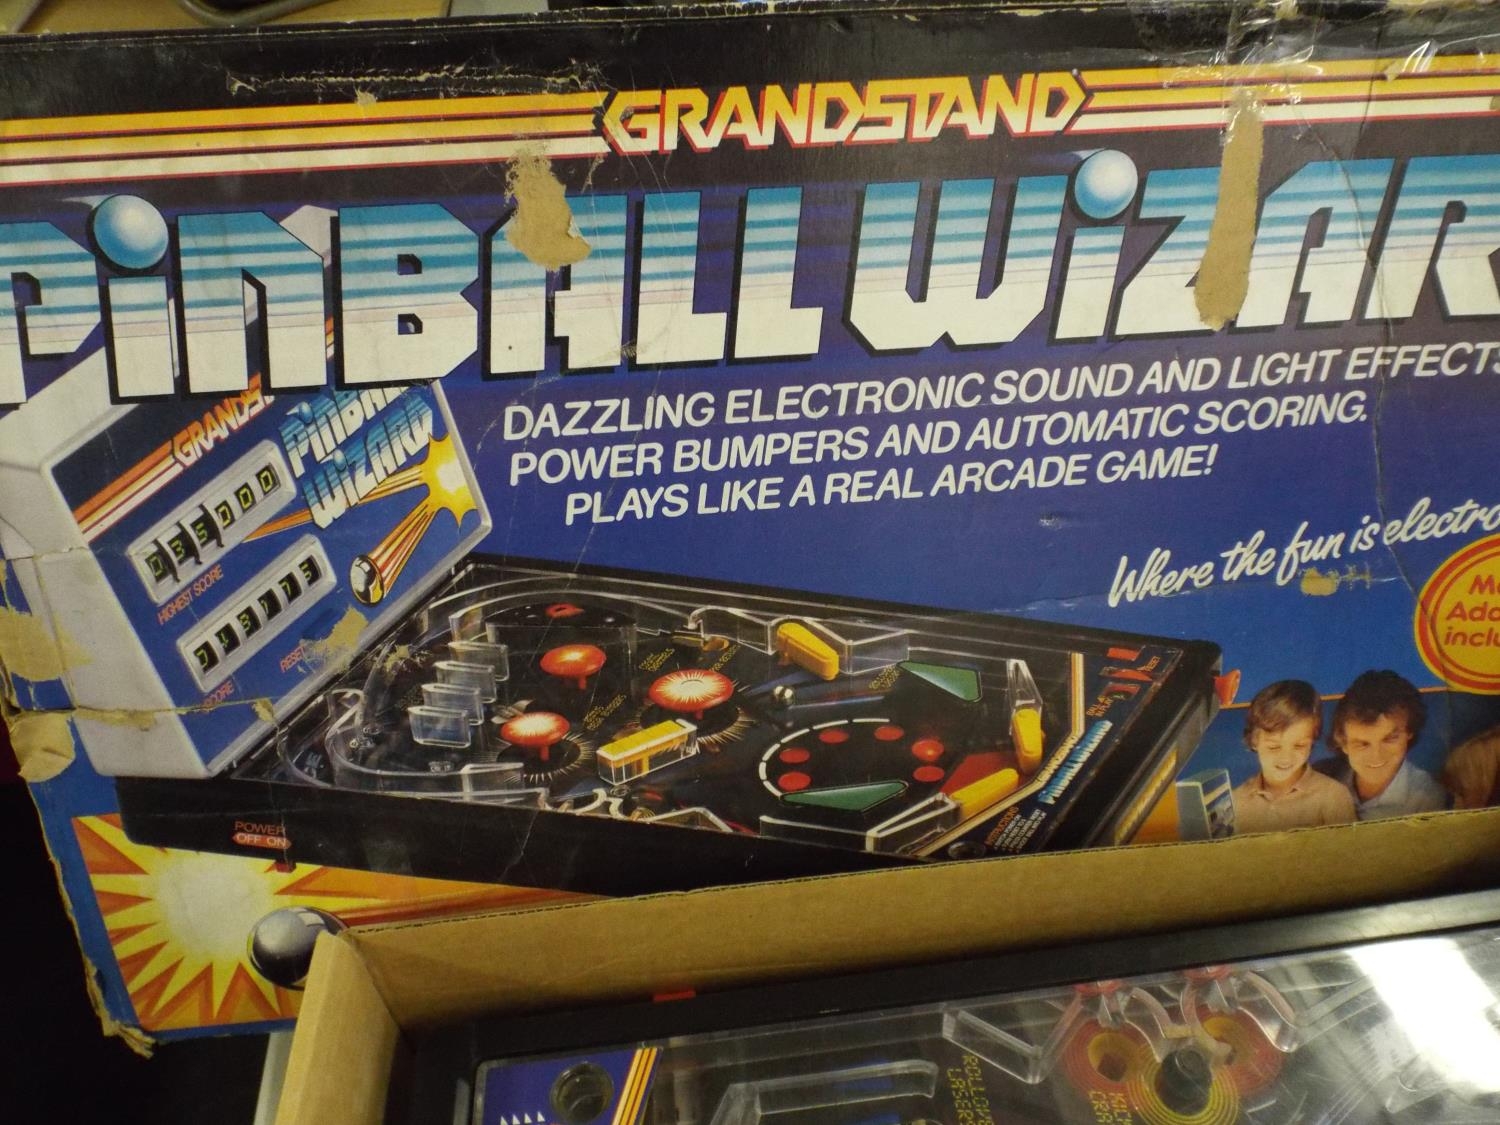 wizard electronic game